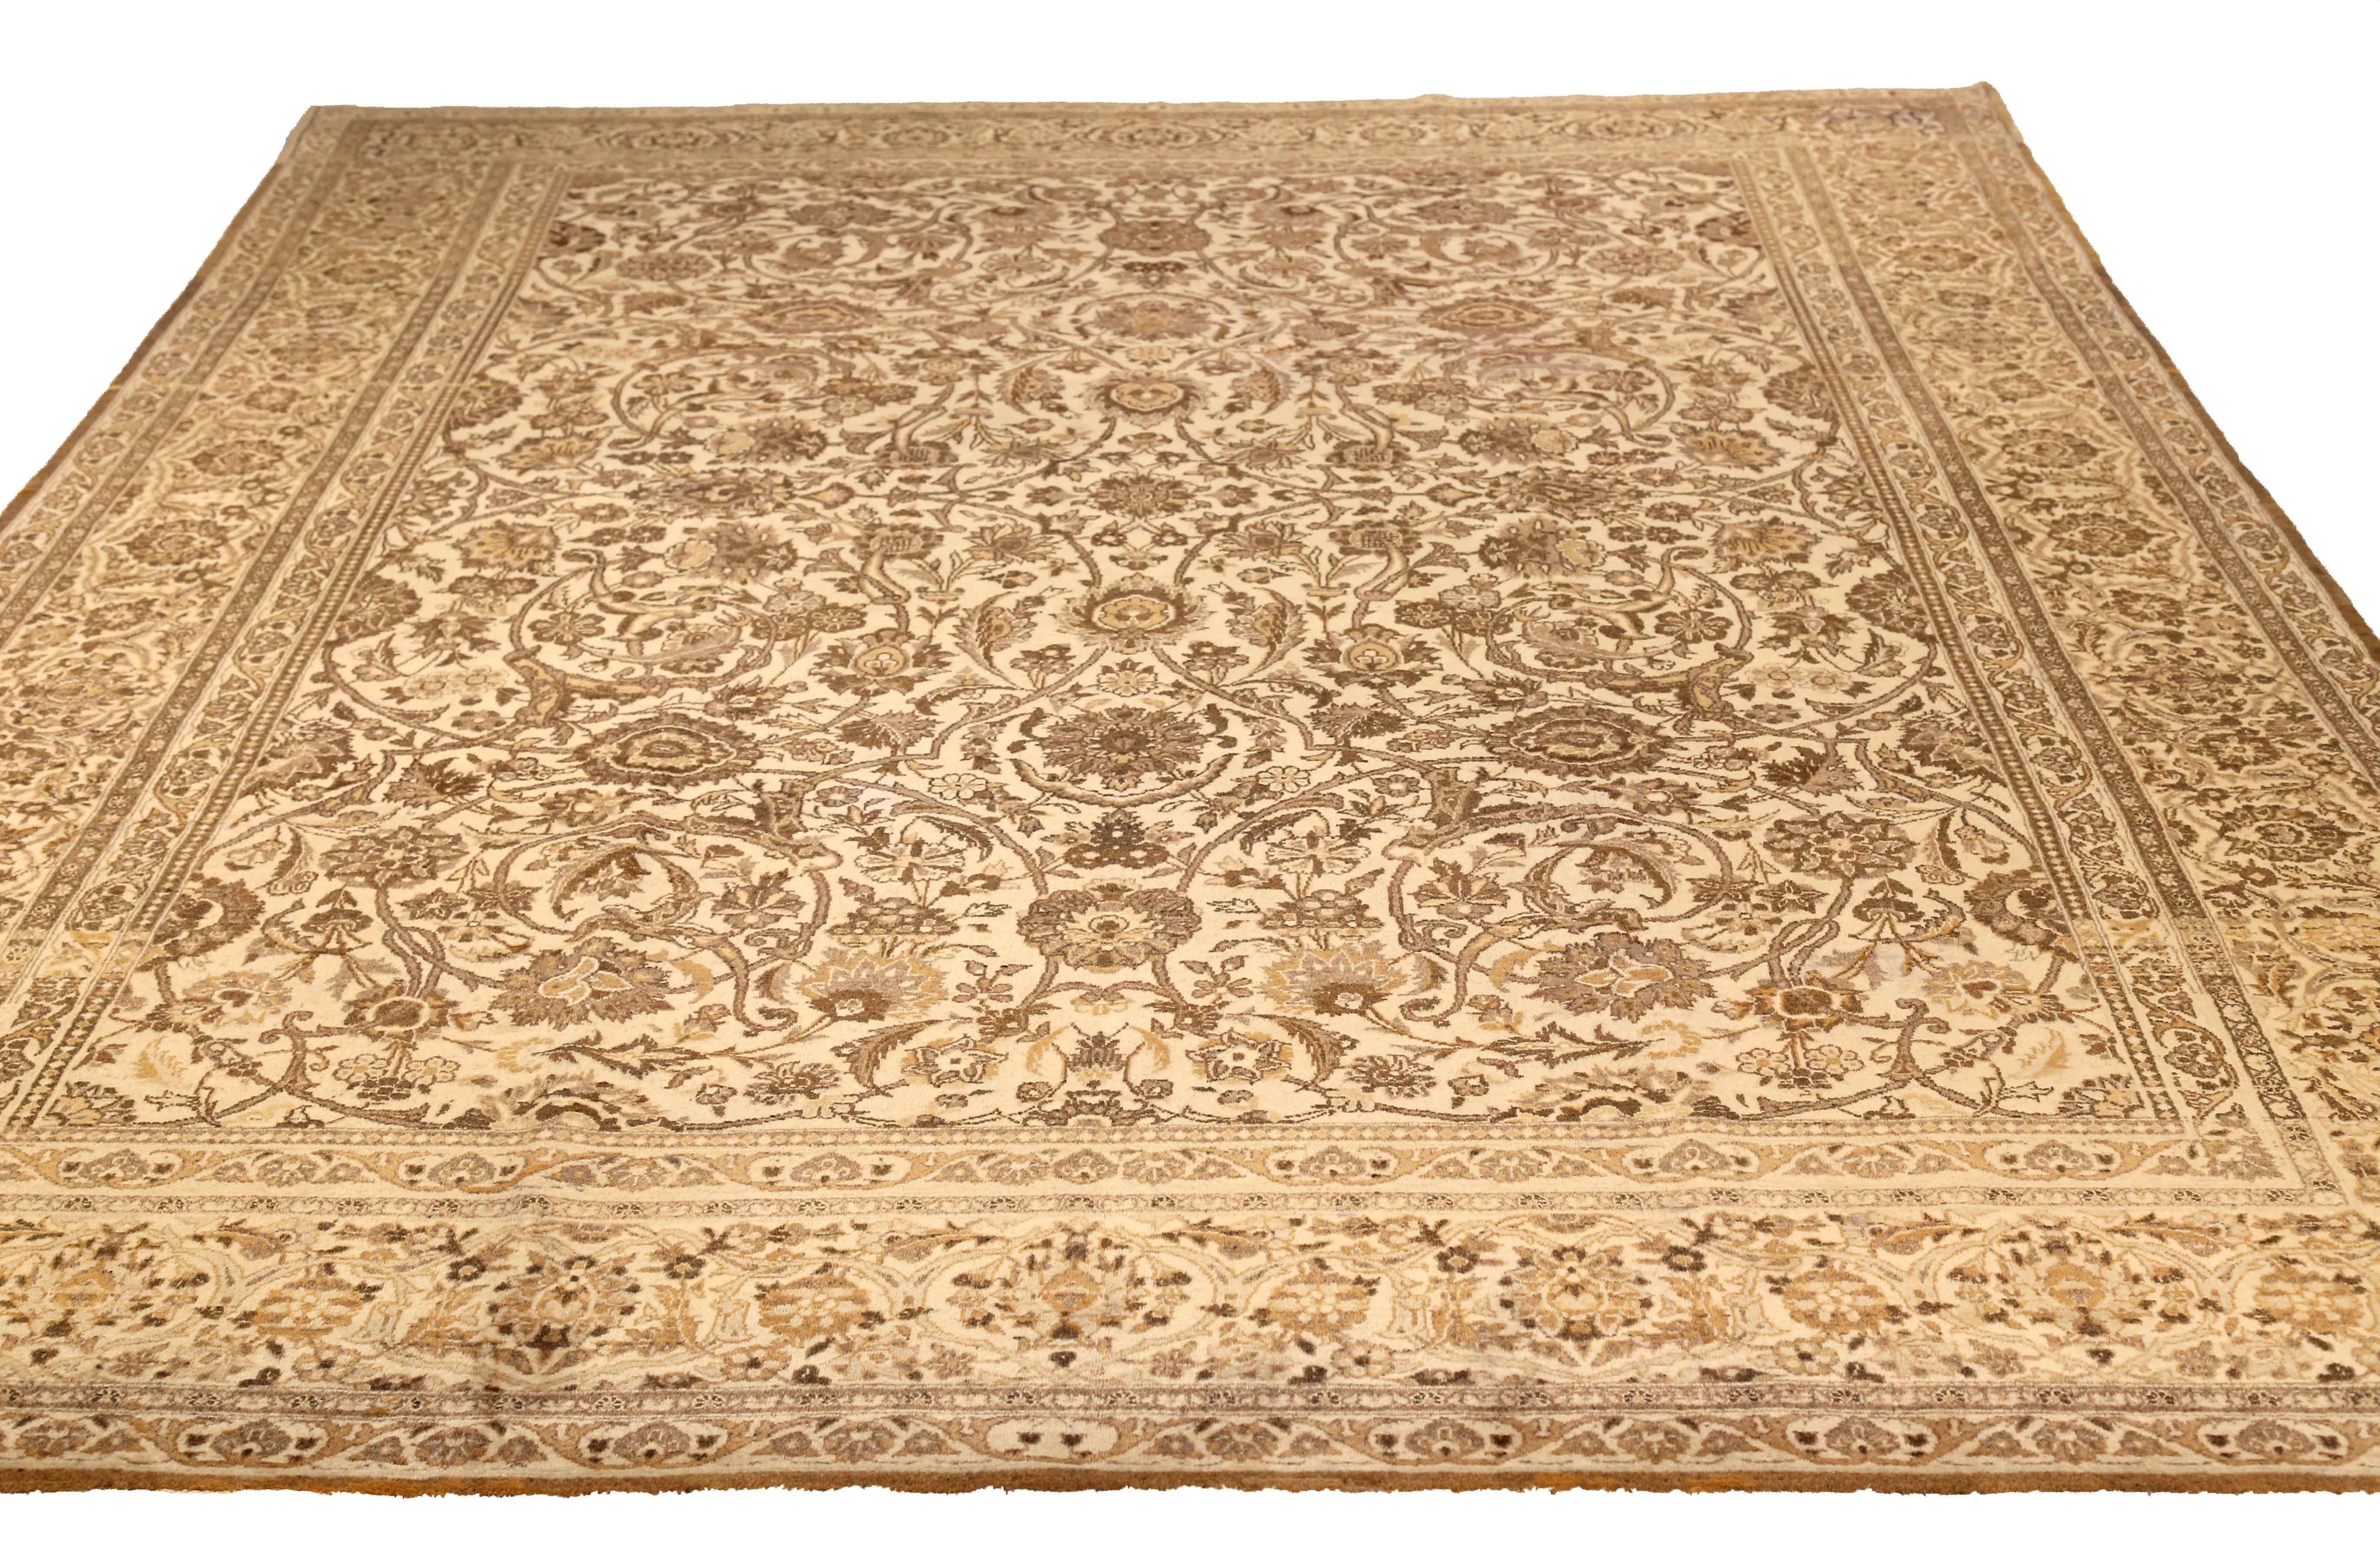 Antique Persian area rug handwoven from the finest sheep’s wool. It’s colored with all-natural vegetable dyes that are safe for humans and pets. It’s a traditional Tabriz design handwoven by expert artisans.

Tabriz is the capital city of East